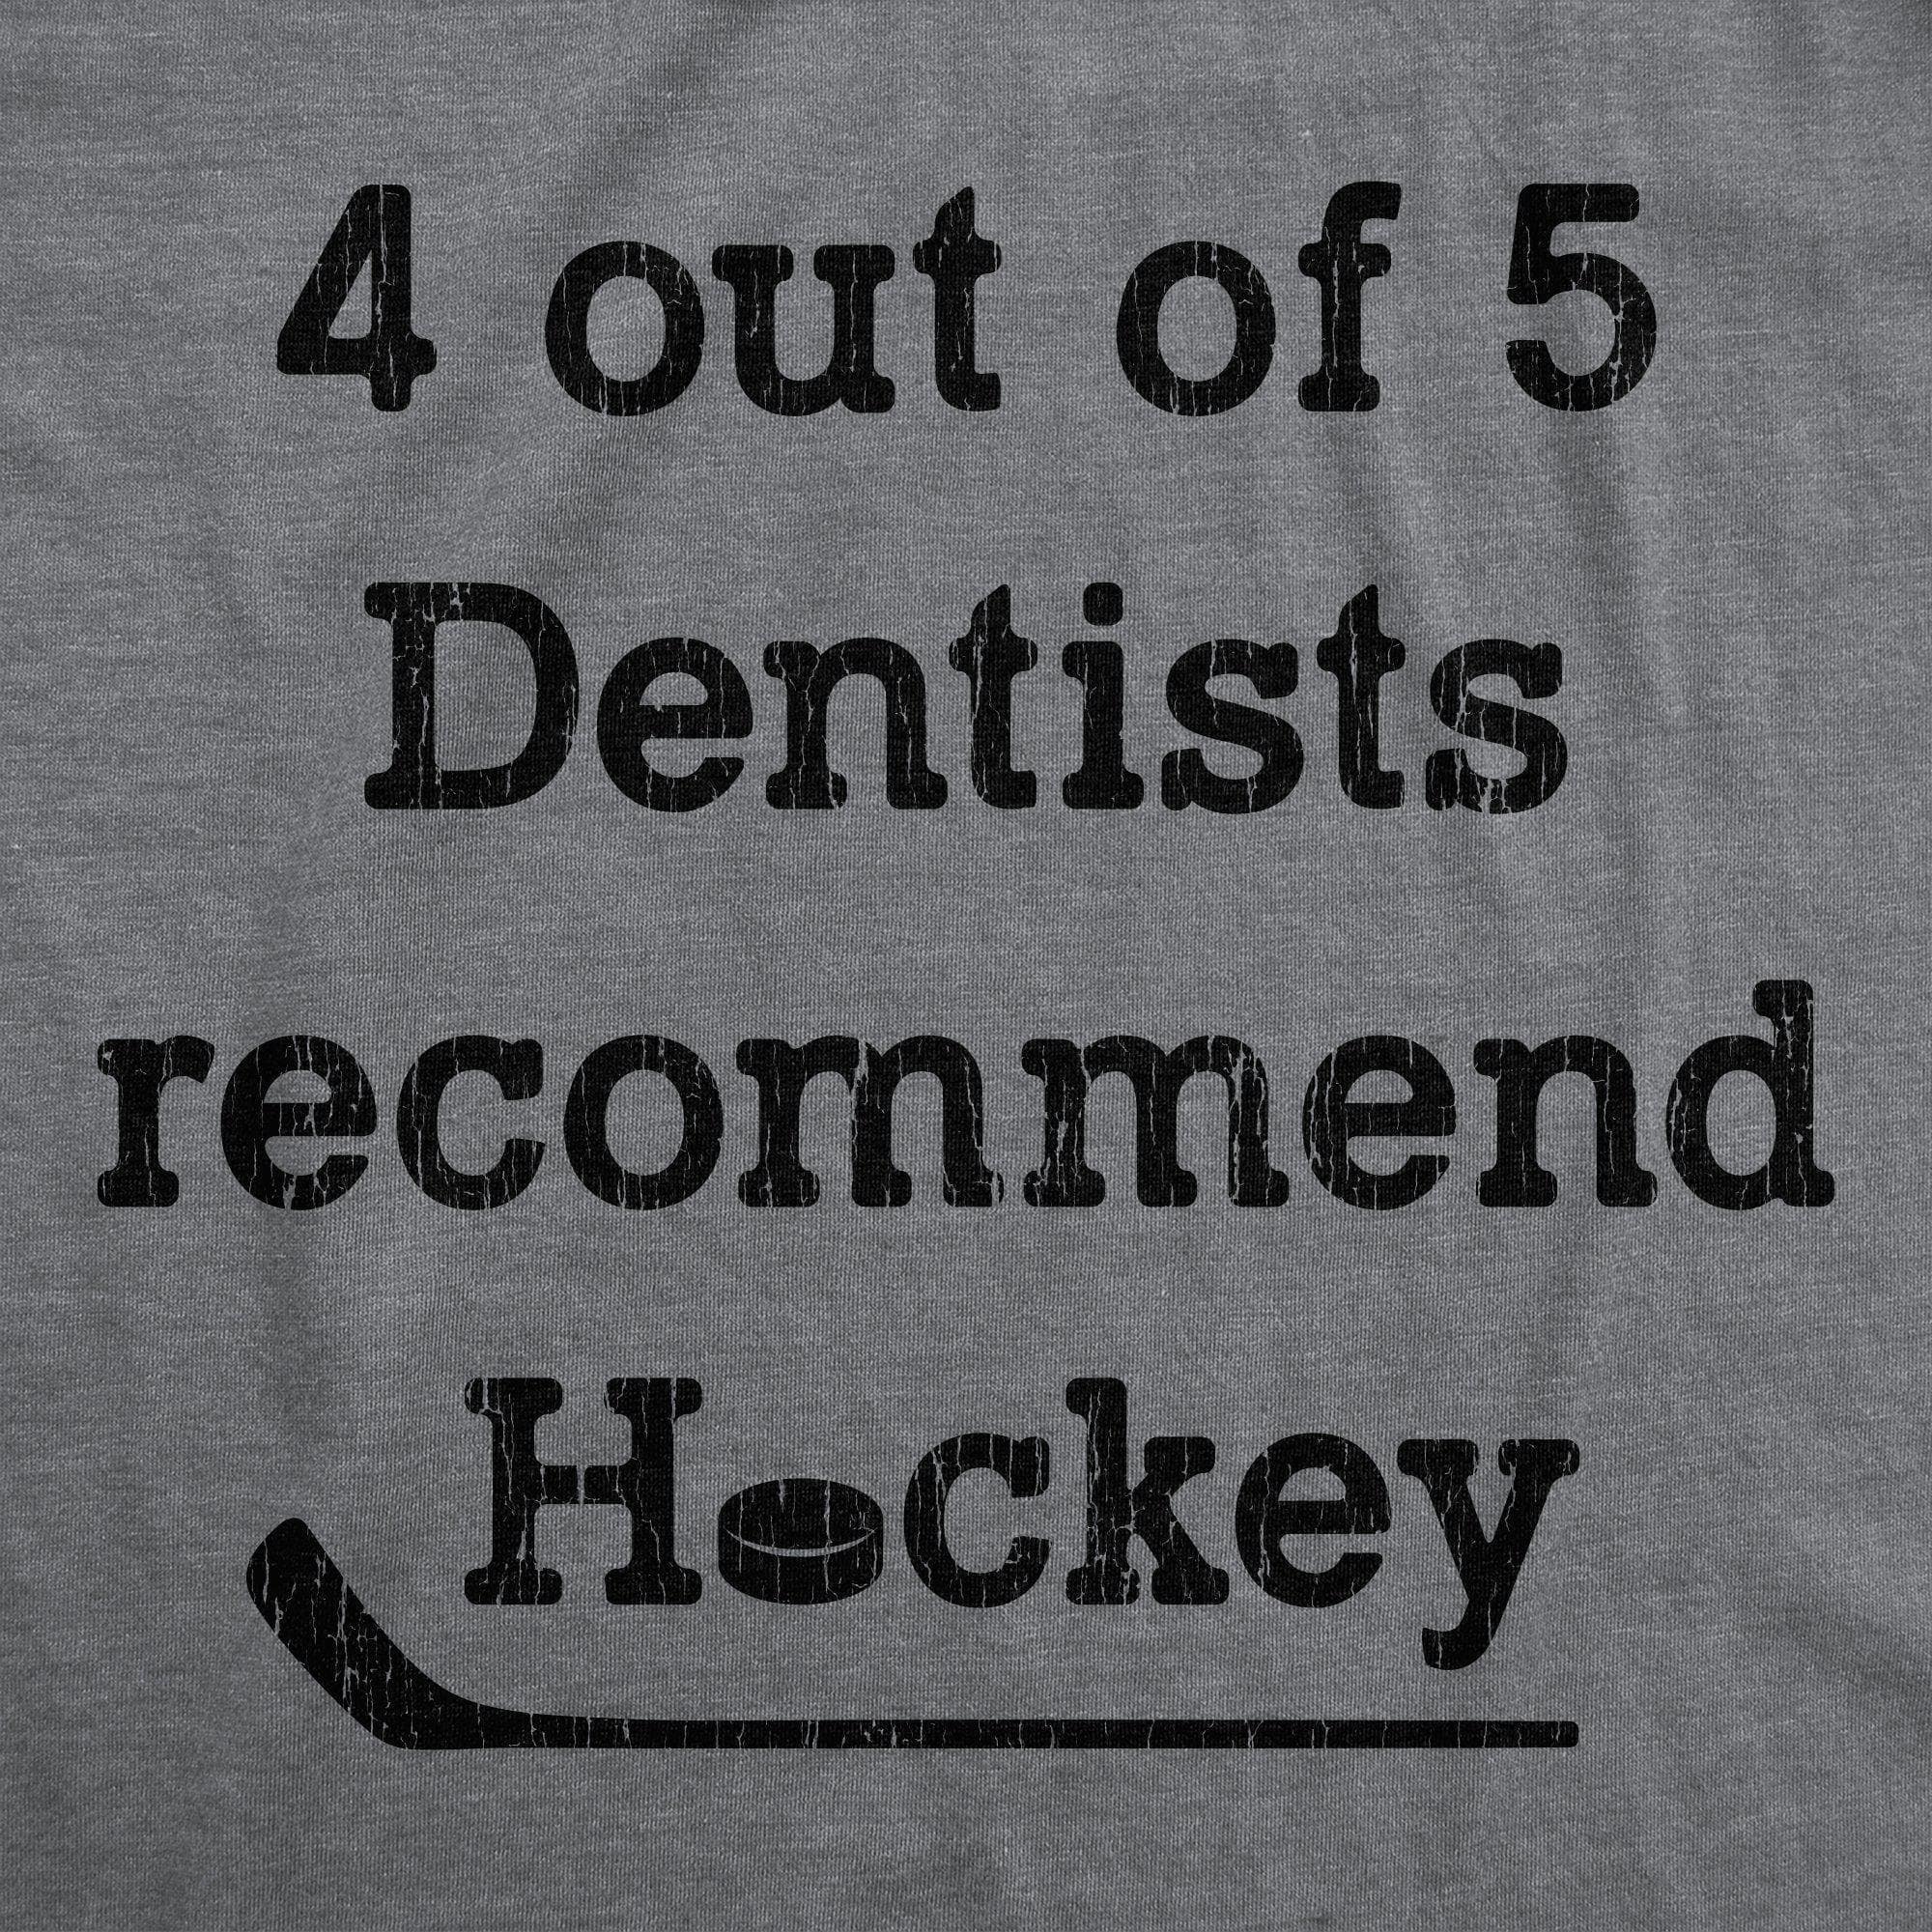 4 Out Of 5 Dentists Recommend Hockey Men's Tshirt - Crazy Dog T-Shirts